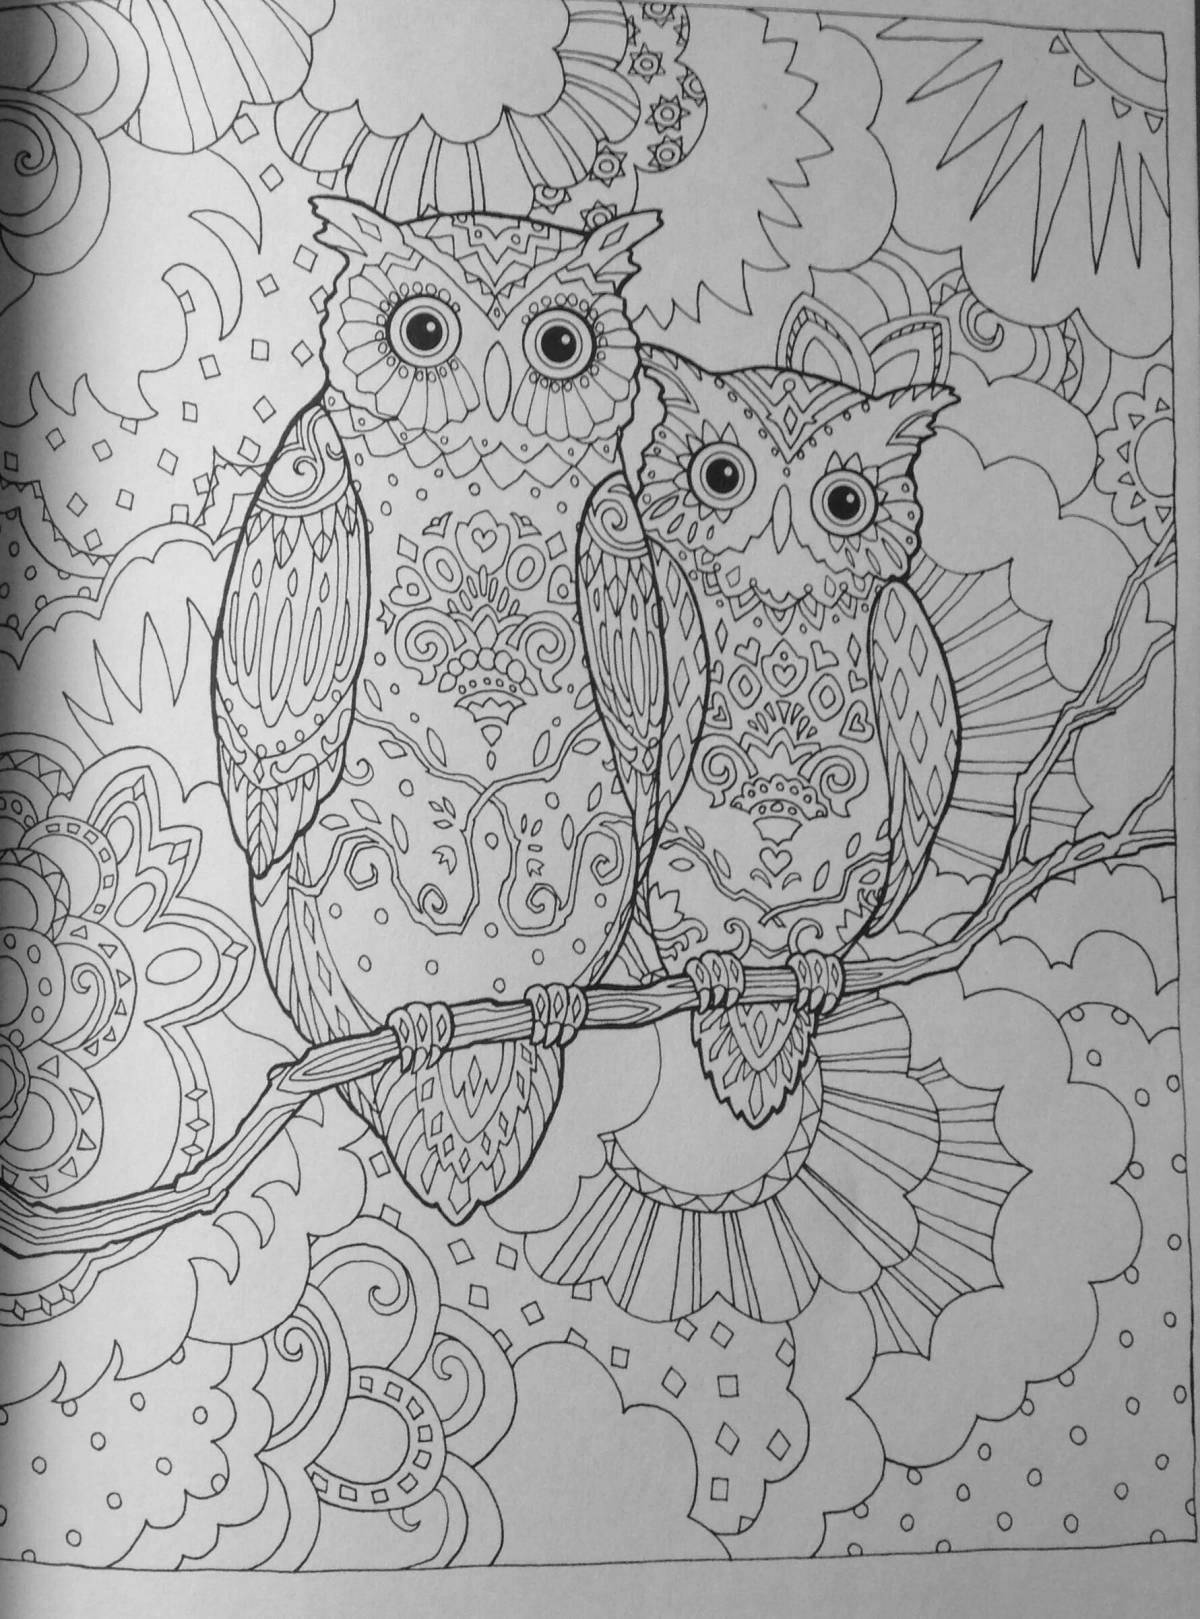 High spirited coloring book